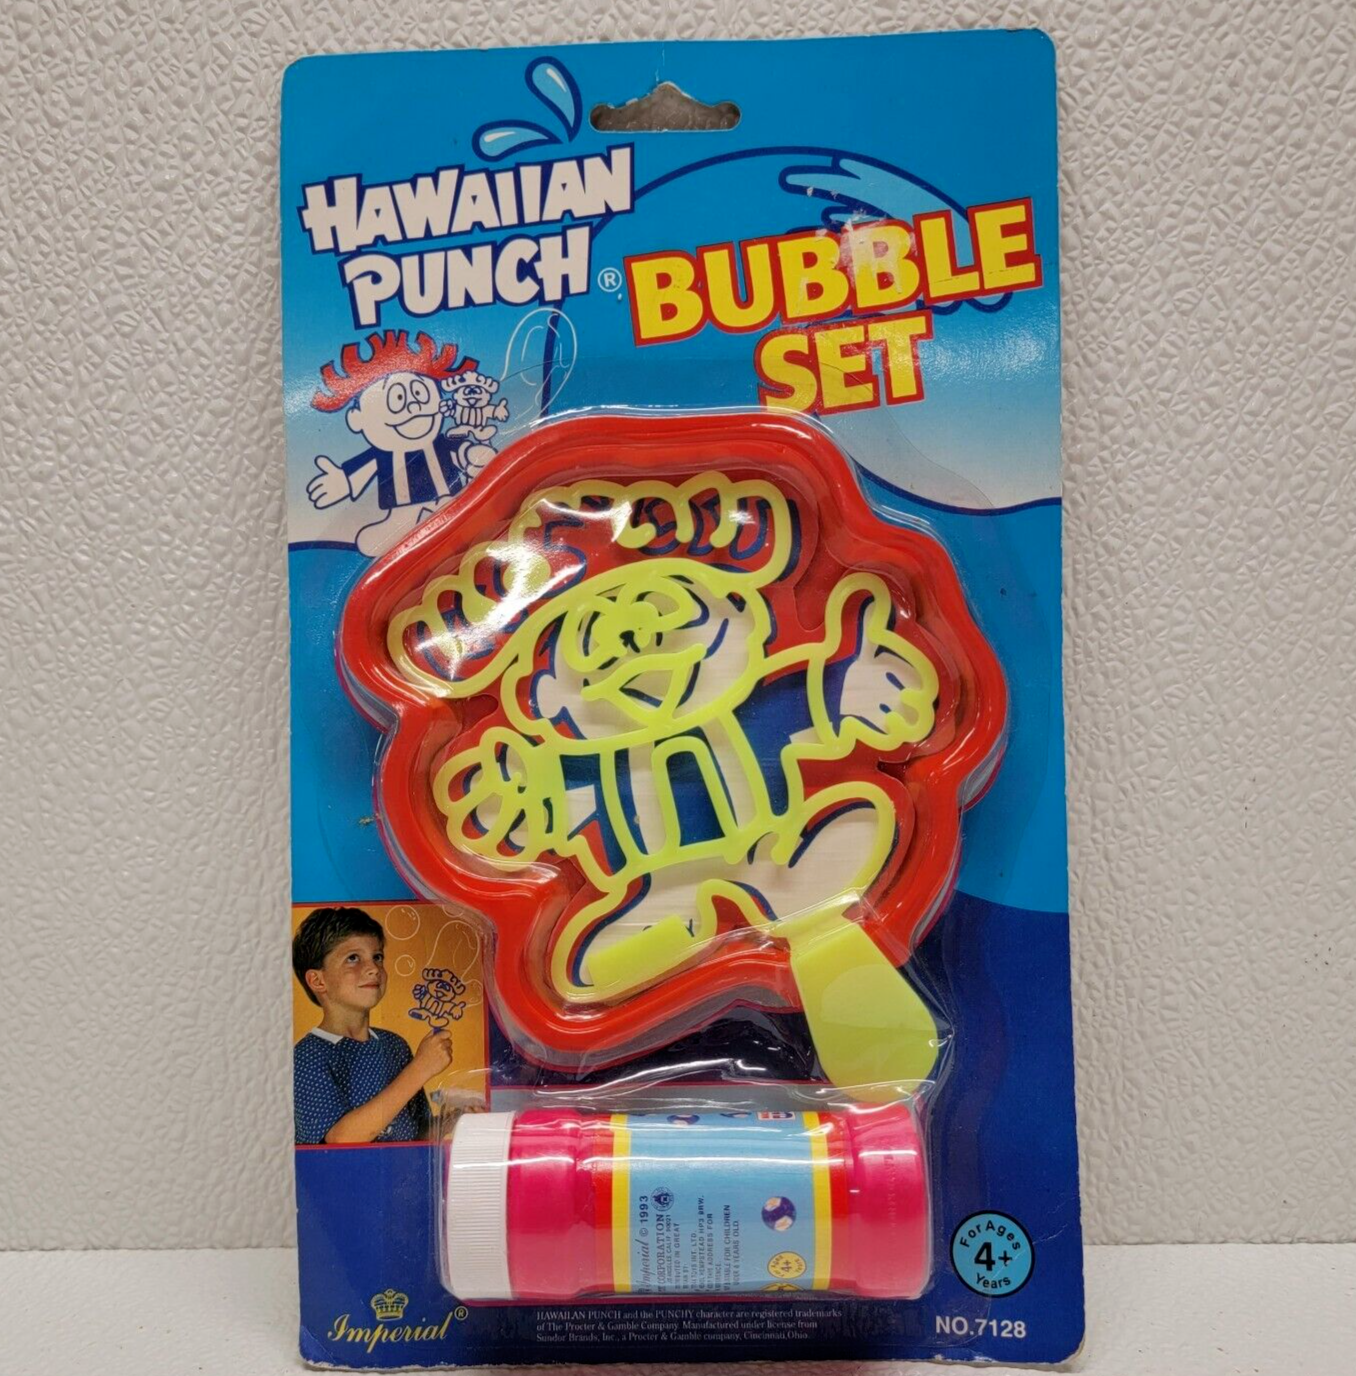 Primary image for RARE Vintage 1995 Hawaiian Punch Bubble Set Imperial Toy 90s Kids New Sealed! 